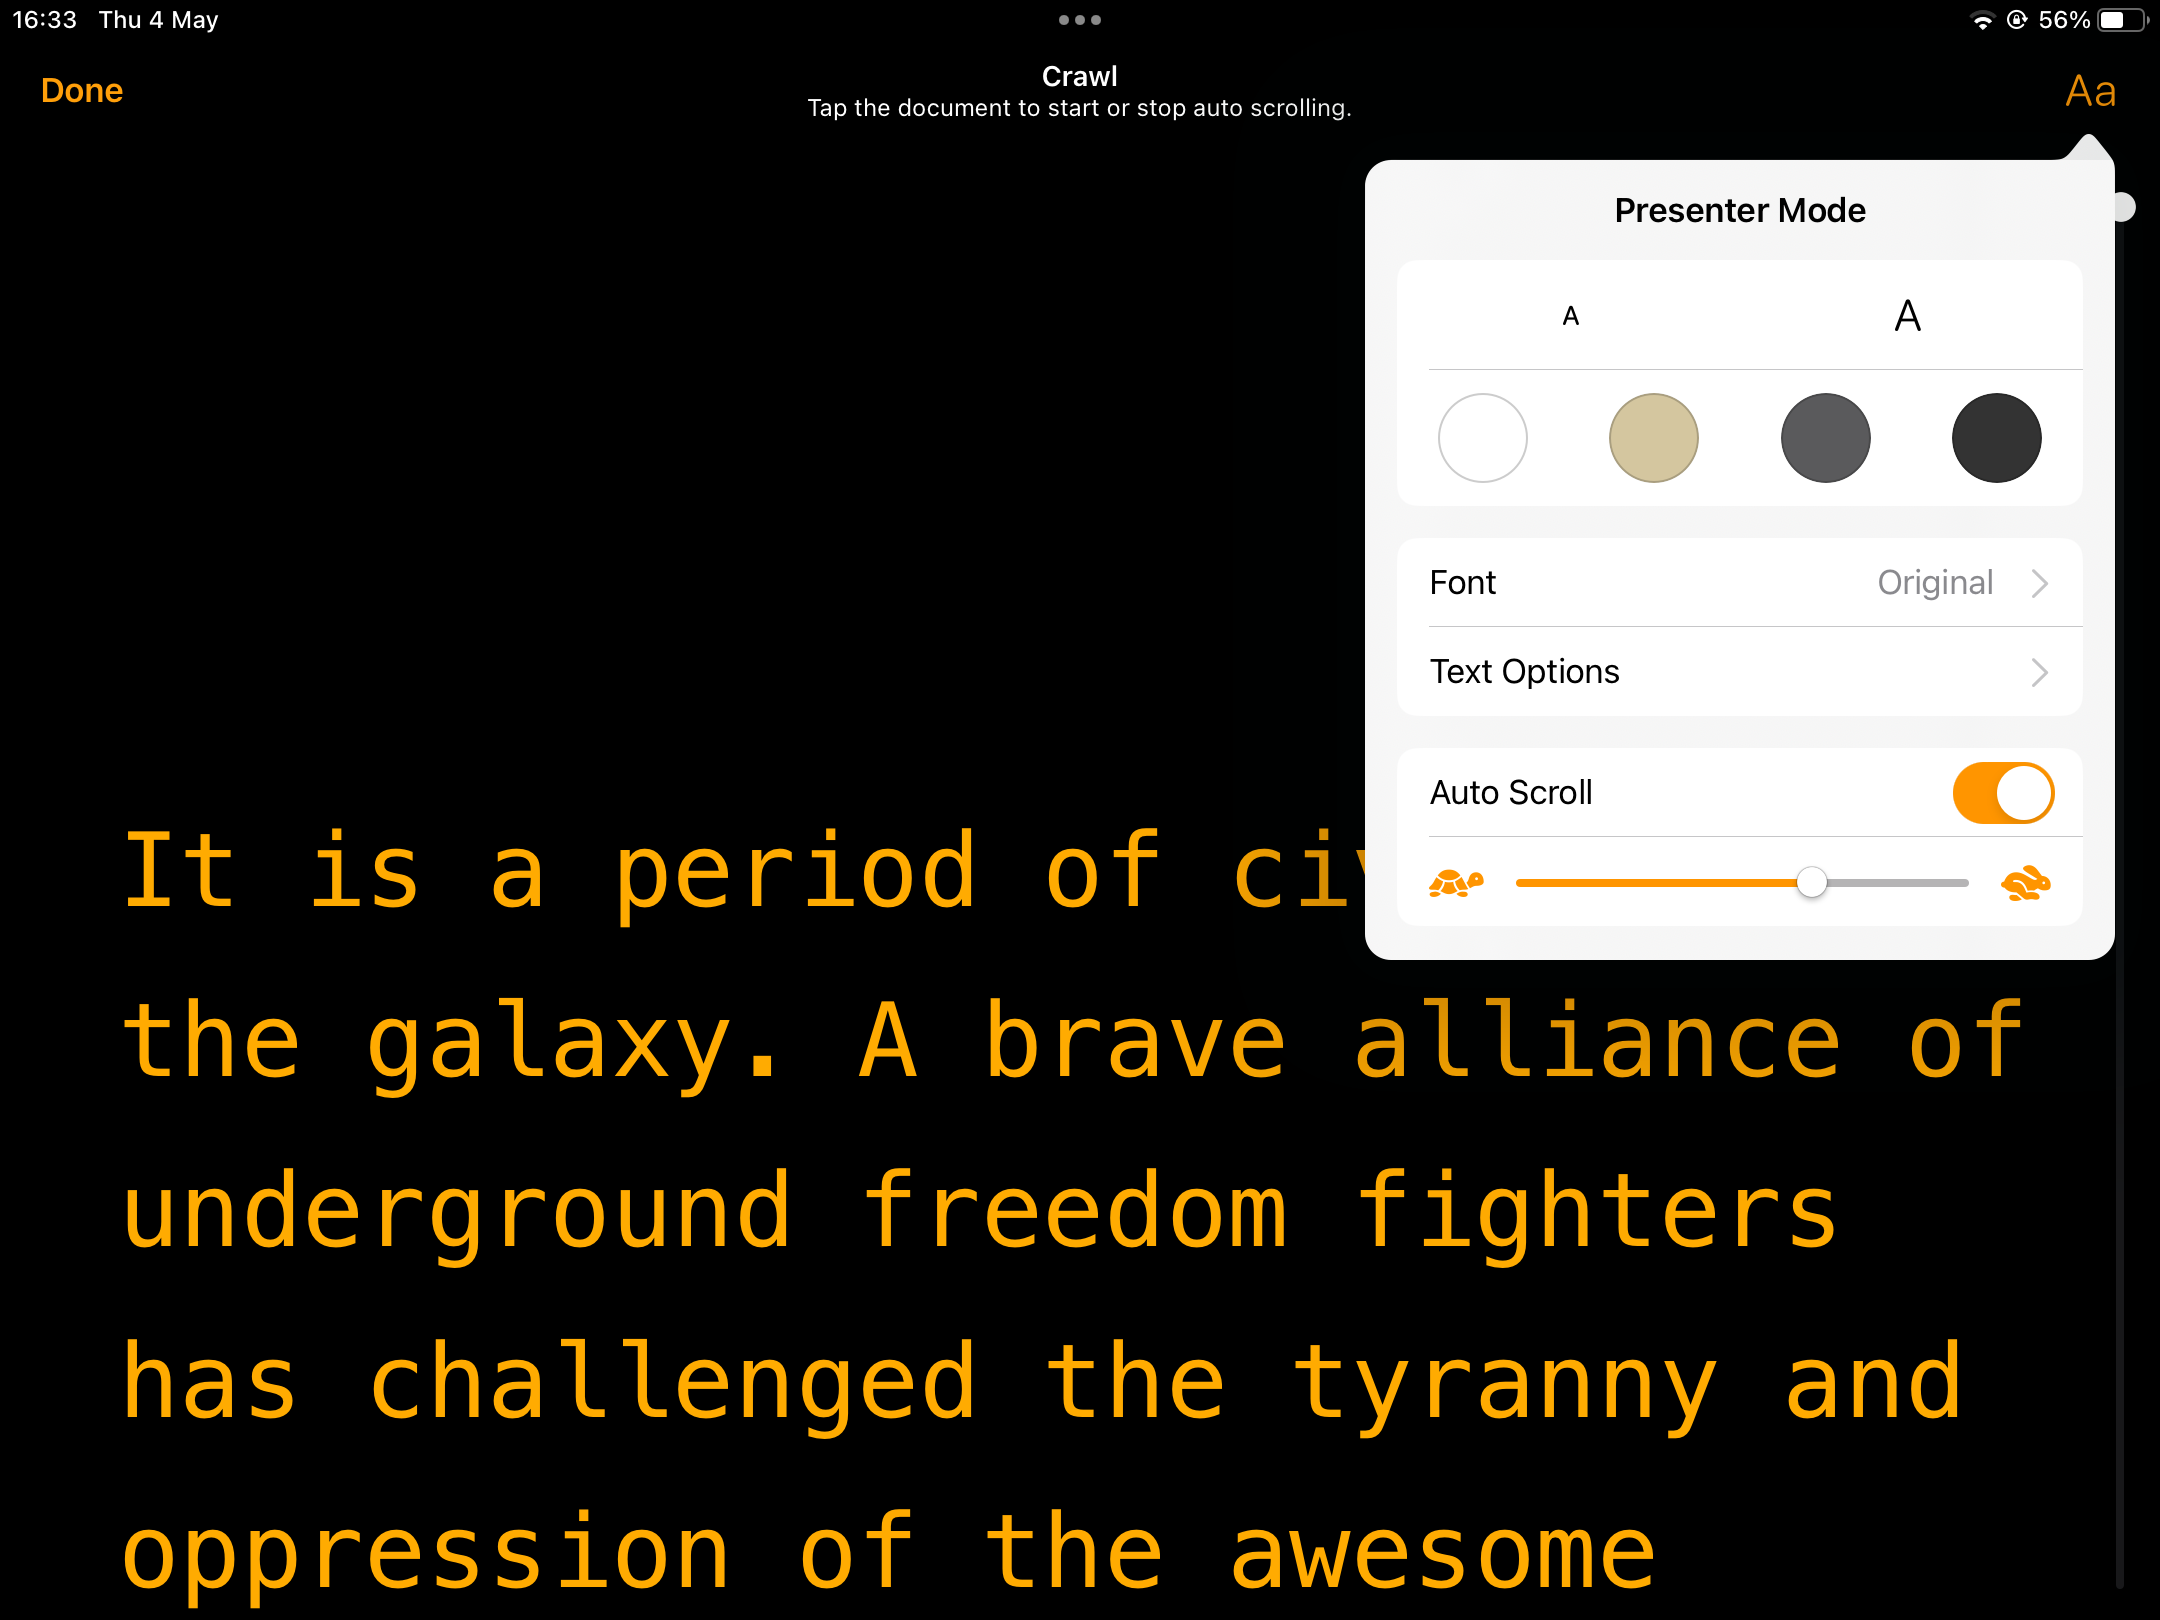 Screenshot of iPad with the Presenter Mode controls showing.